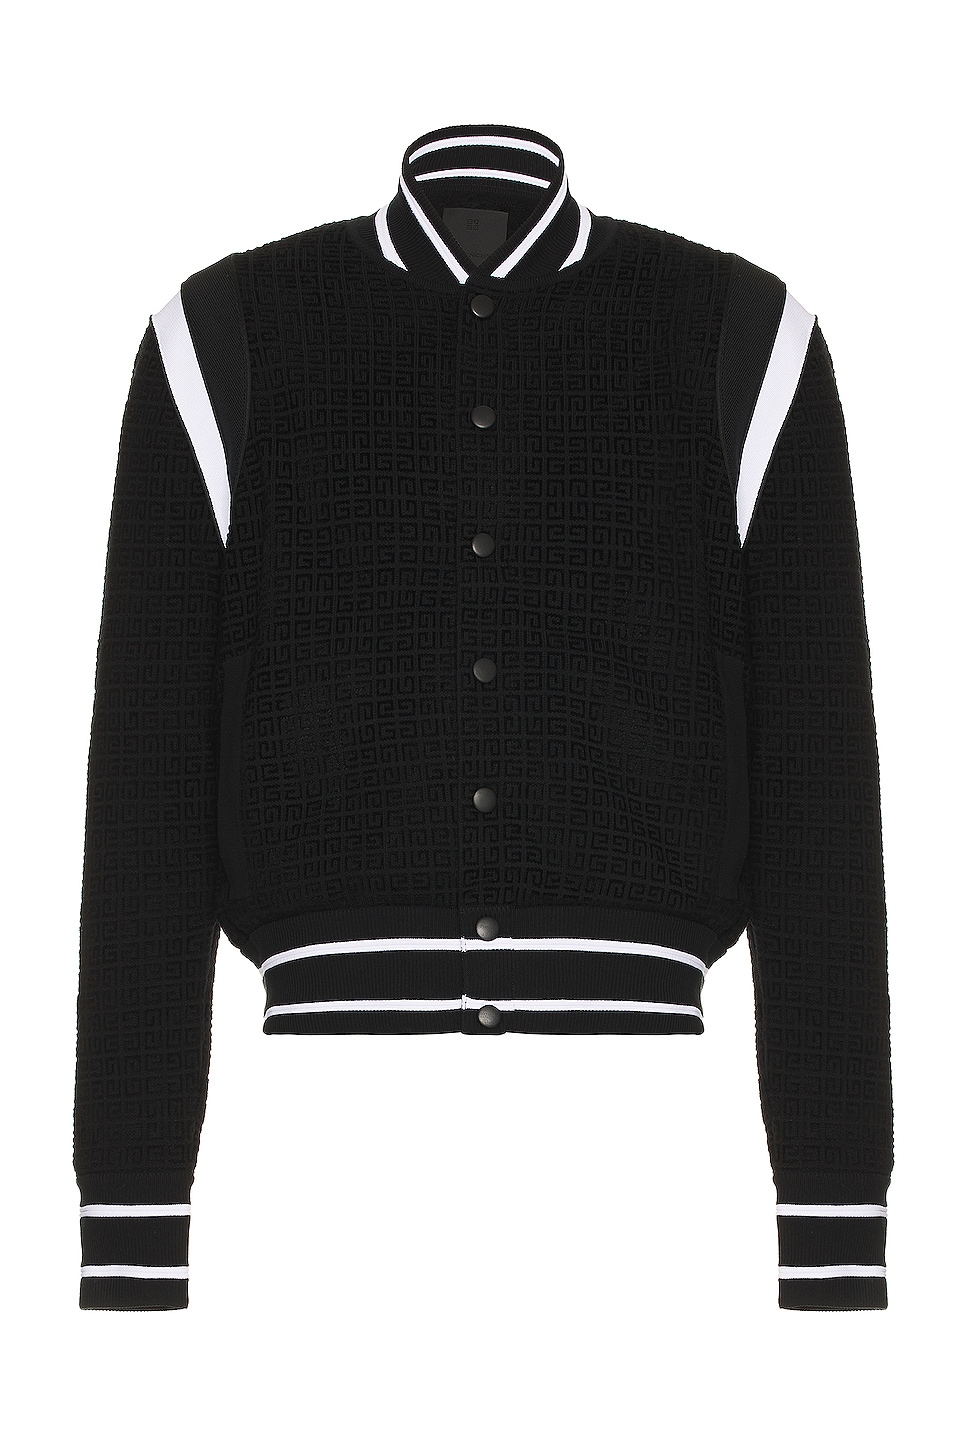 Image 1 of Givenchy Knitted Bomber Jacket in Black